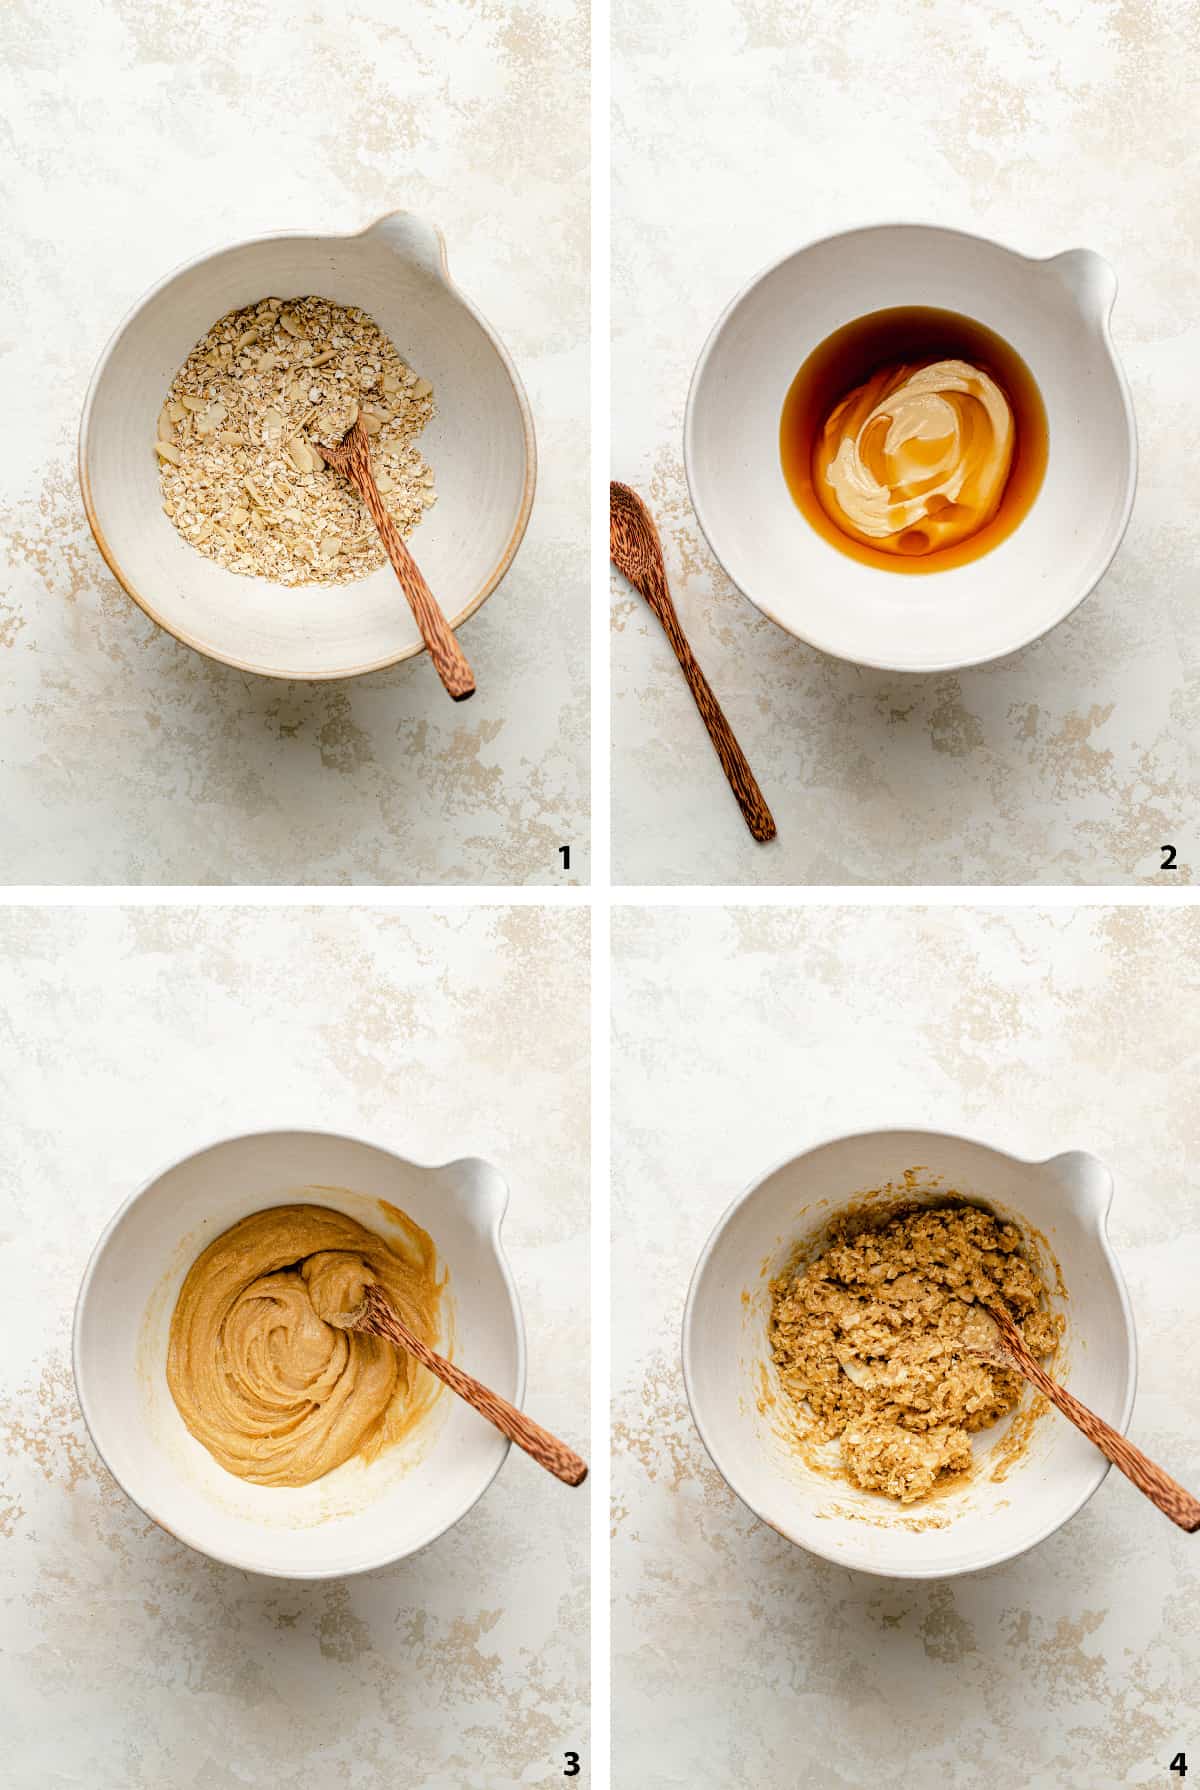 Process of mixing the dry and wet ingredients into a granola bar base.